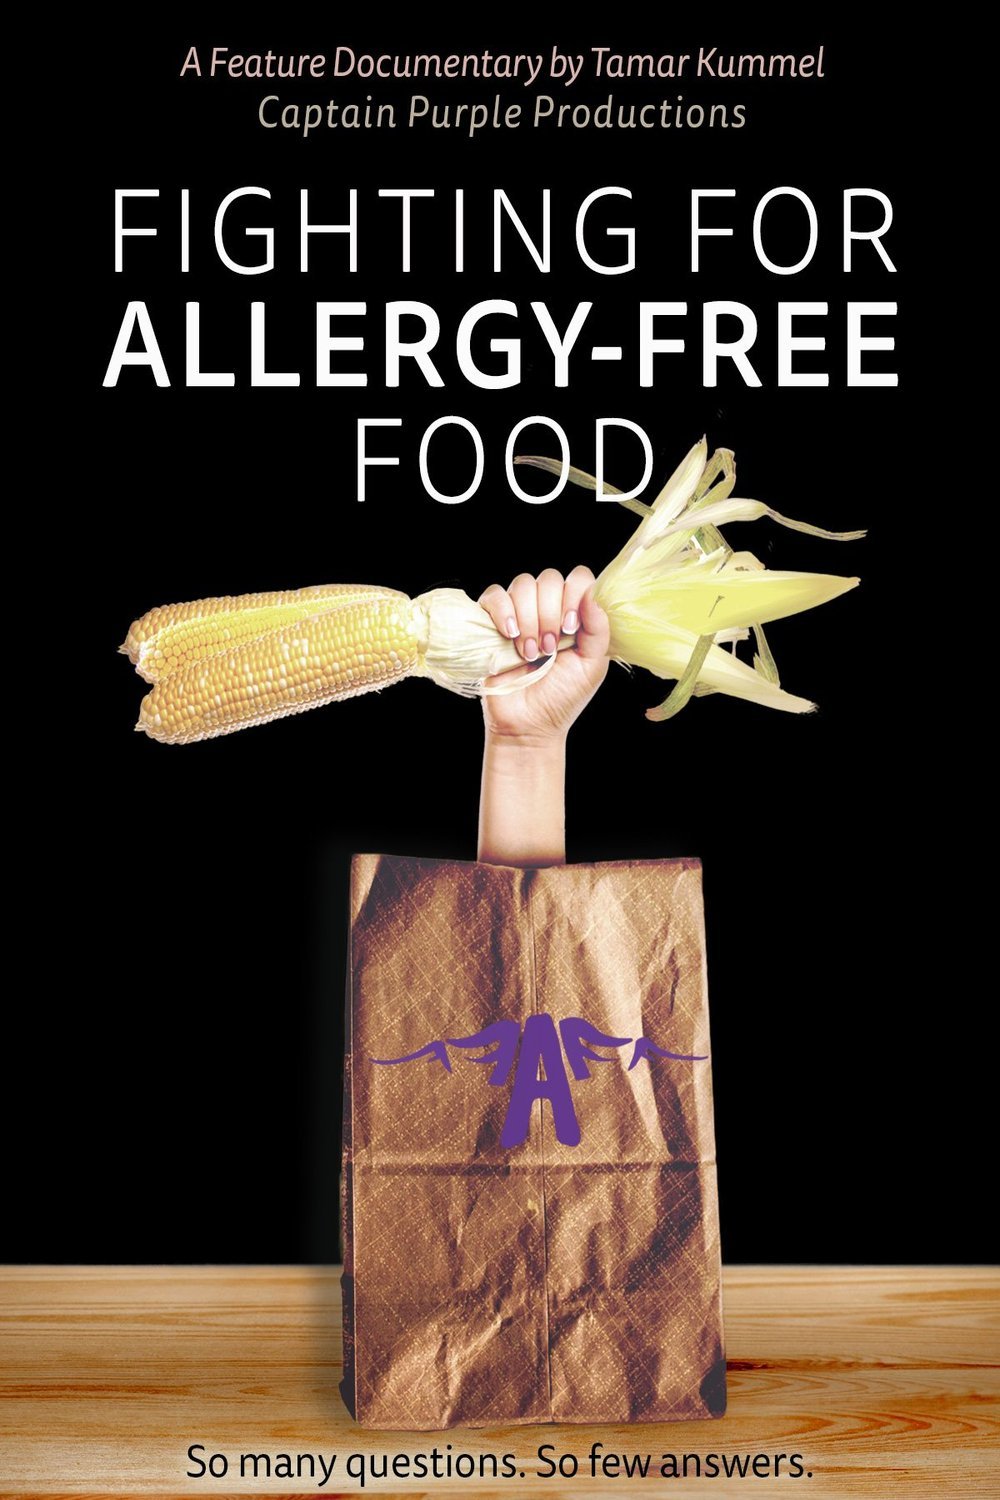 Poster of the movie Allergy Free Documentary